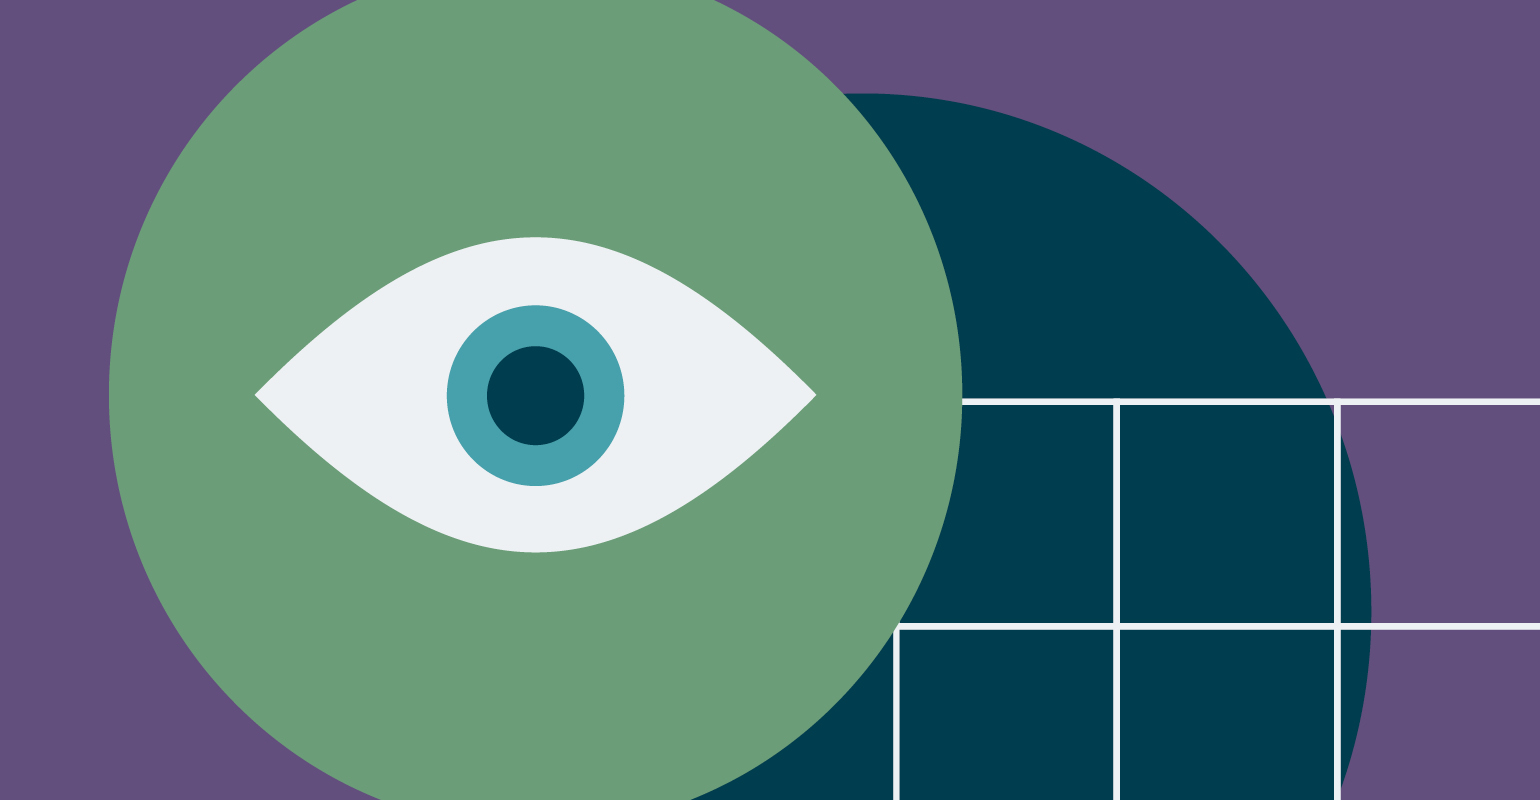 Illustration of an blue eye over a purple backgrounf and white grid with geometric shapes